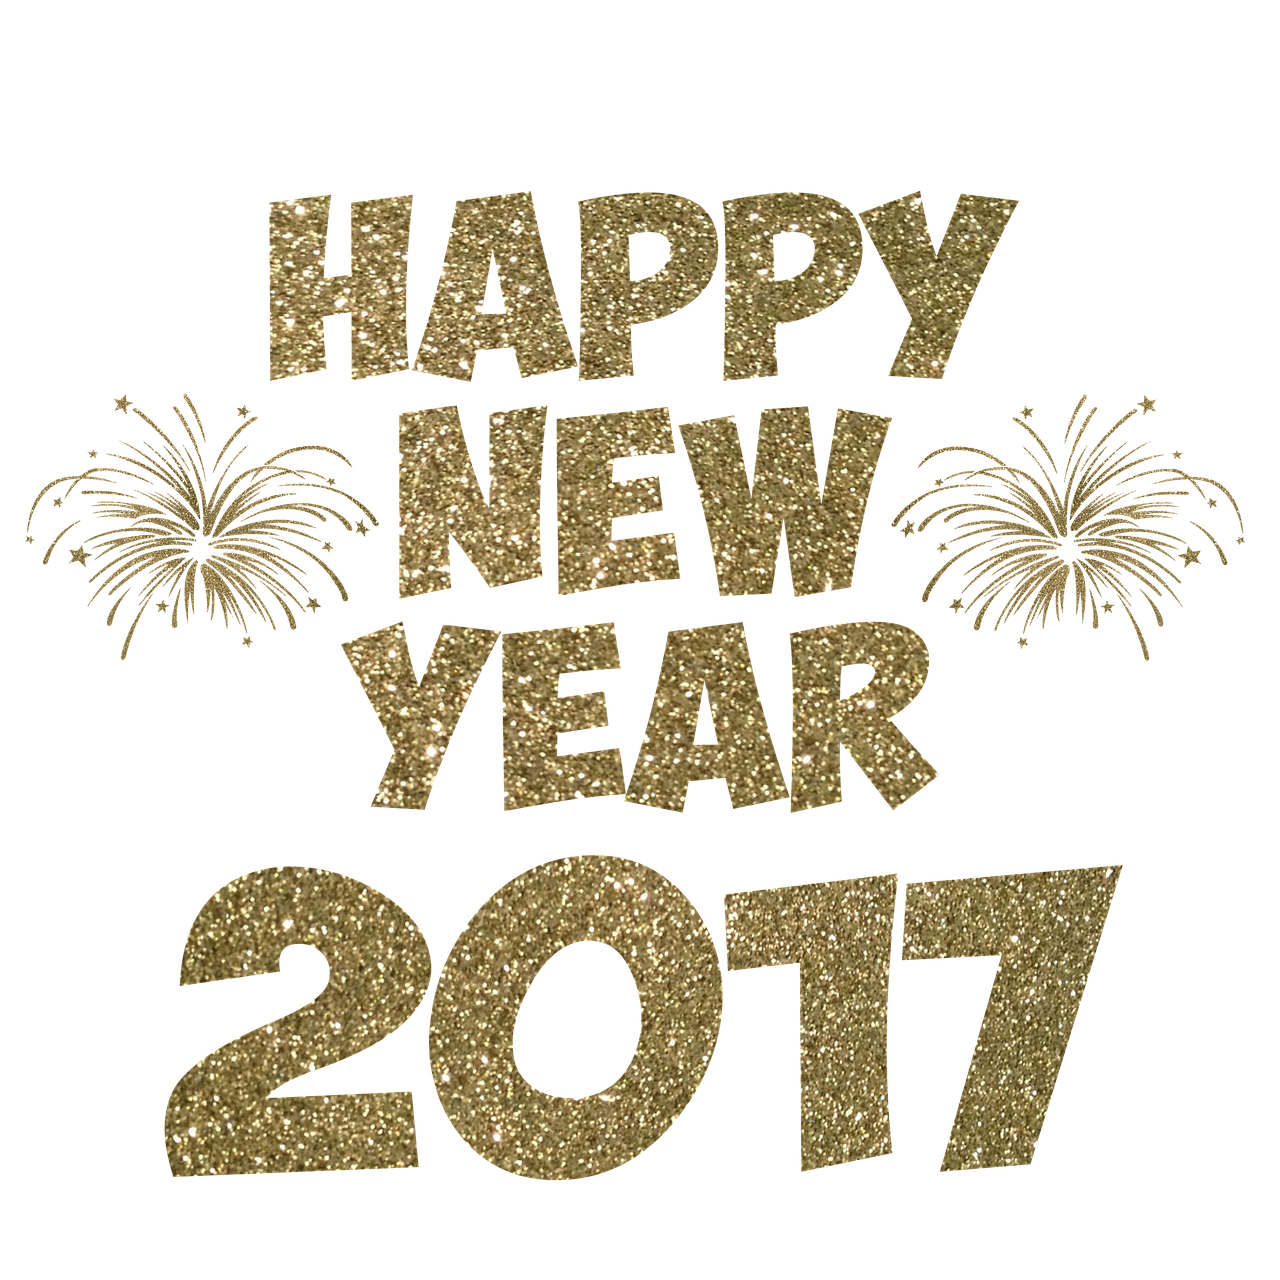 2017 Happy New Year Photo PNG Transparent Background, Free Download #28828  - FreeIconsPNG